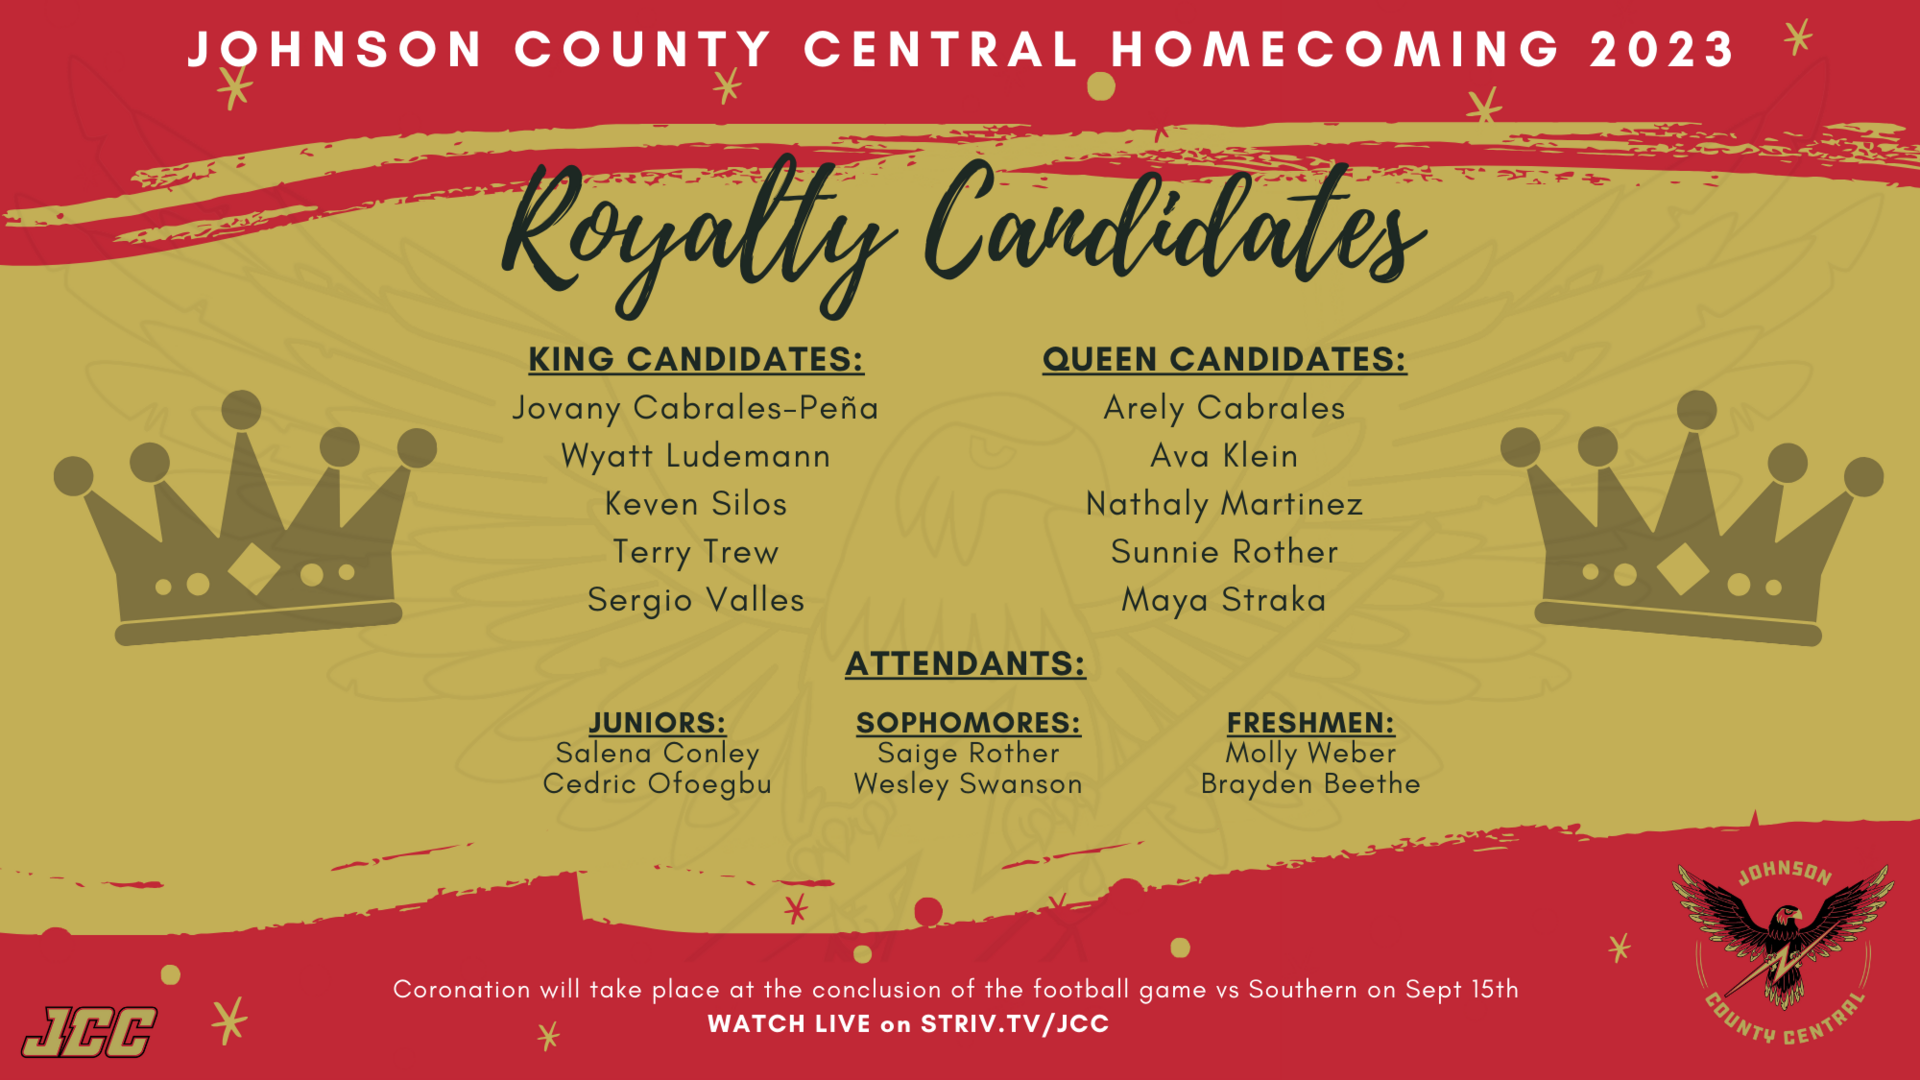 2023 JCC Homecoming Royalty Candidates